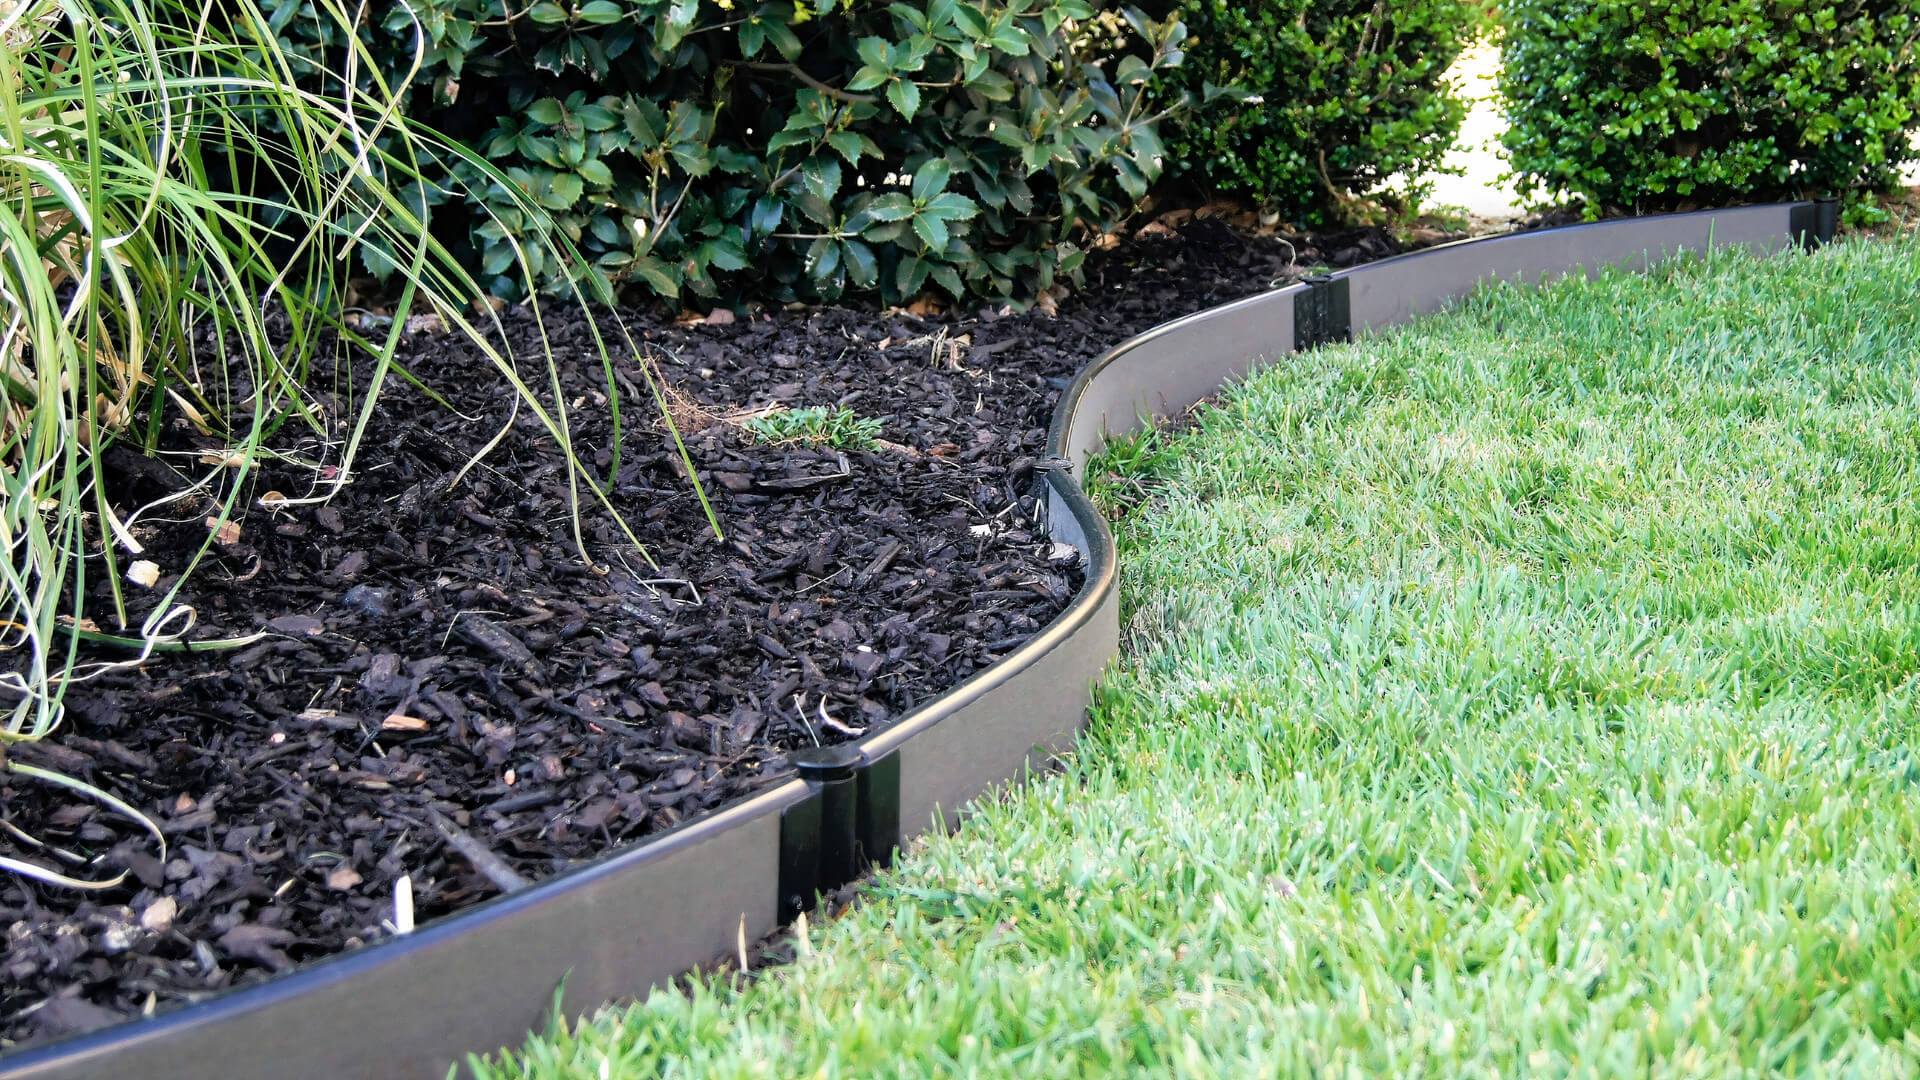 Tool-Free Landscape Edging Kit - Curved Boards Landscape Edging Frame It All Weathered Wood 1'' 16 Feet (Curved Boards)